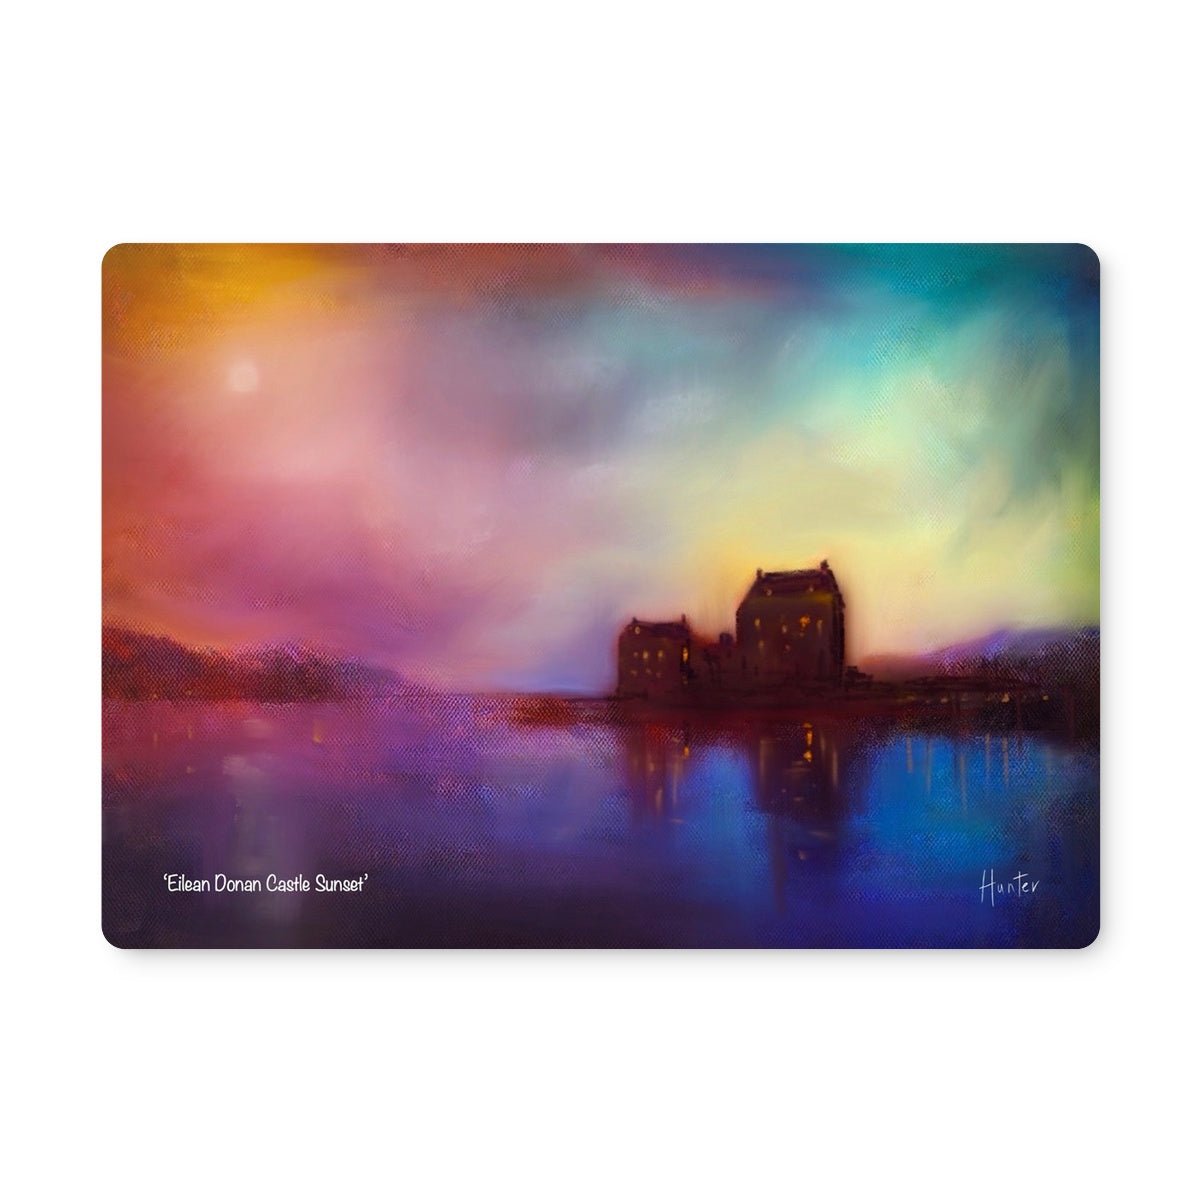 Eilean Donan Castle Sunset Art Gifts Placemat-Placemats-Scottish Castles Art Gallery-2 Placemats-Paintings, Prints, Homeware, Art Gifts From Scotland By Scottish Artist Kevin Hunter